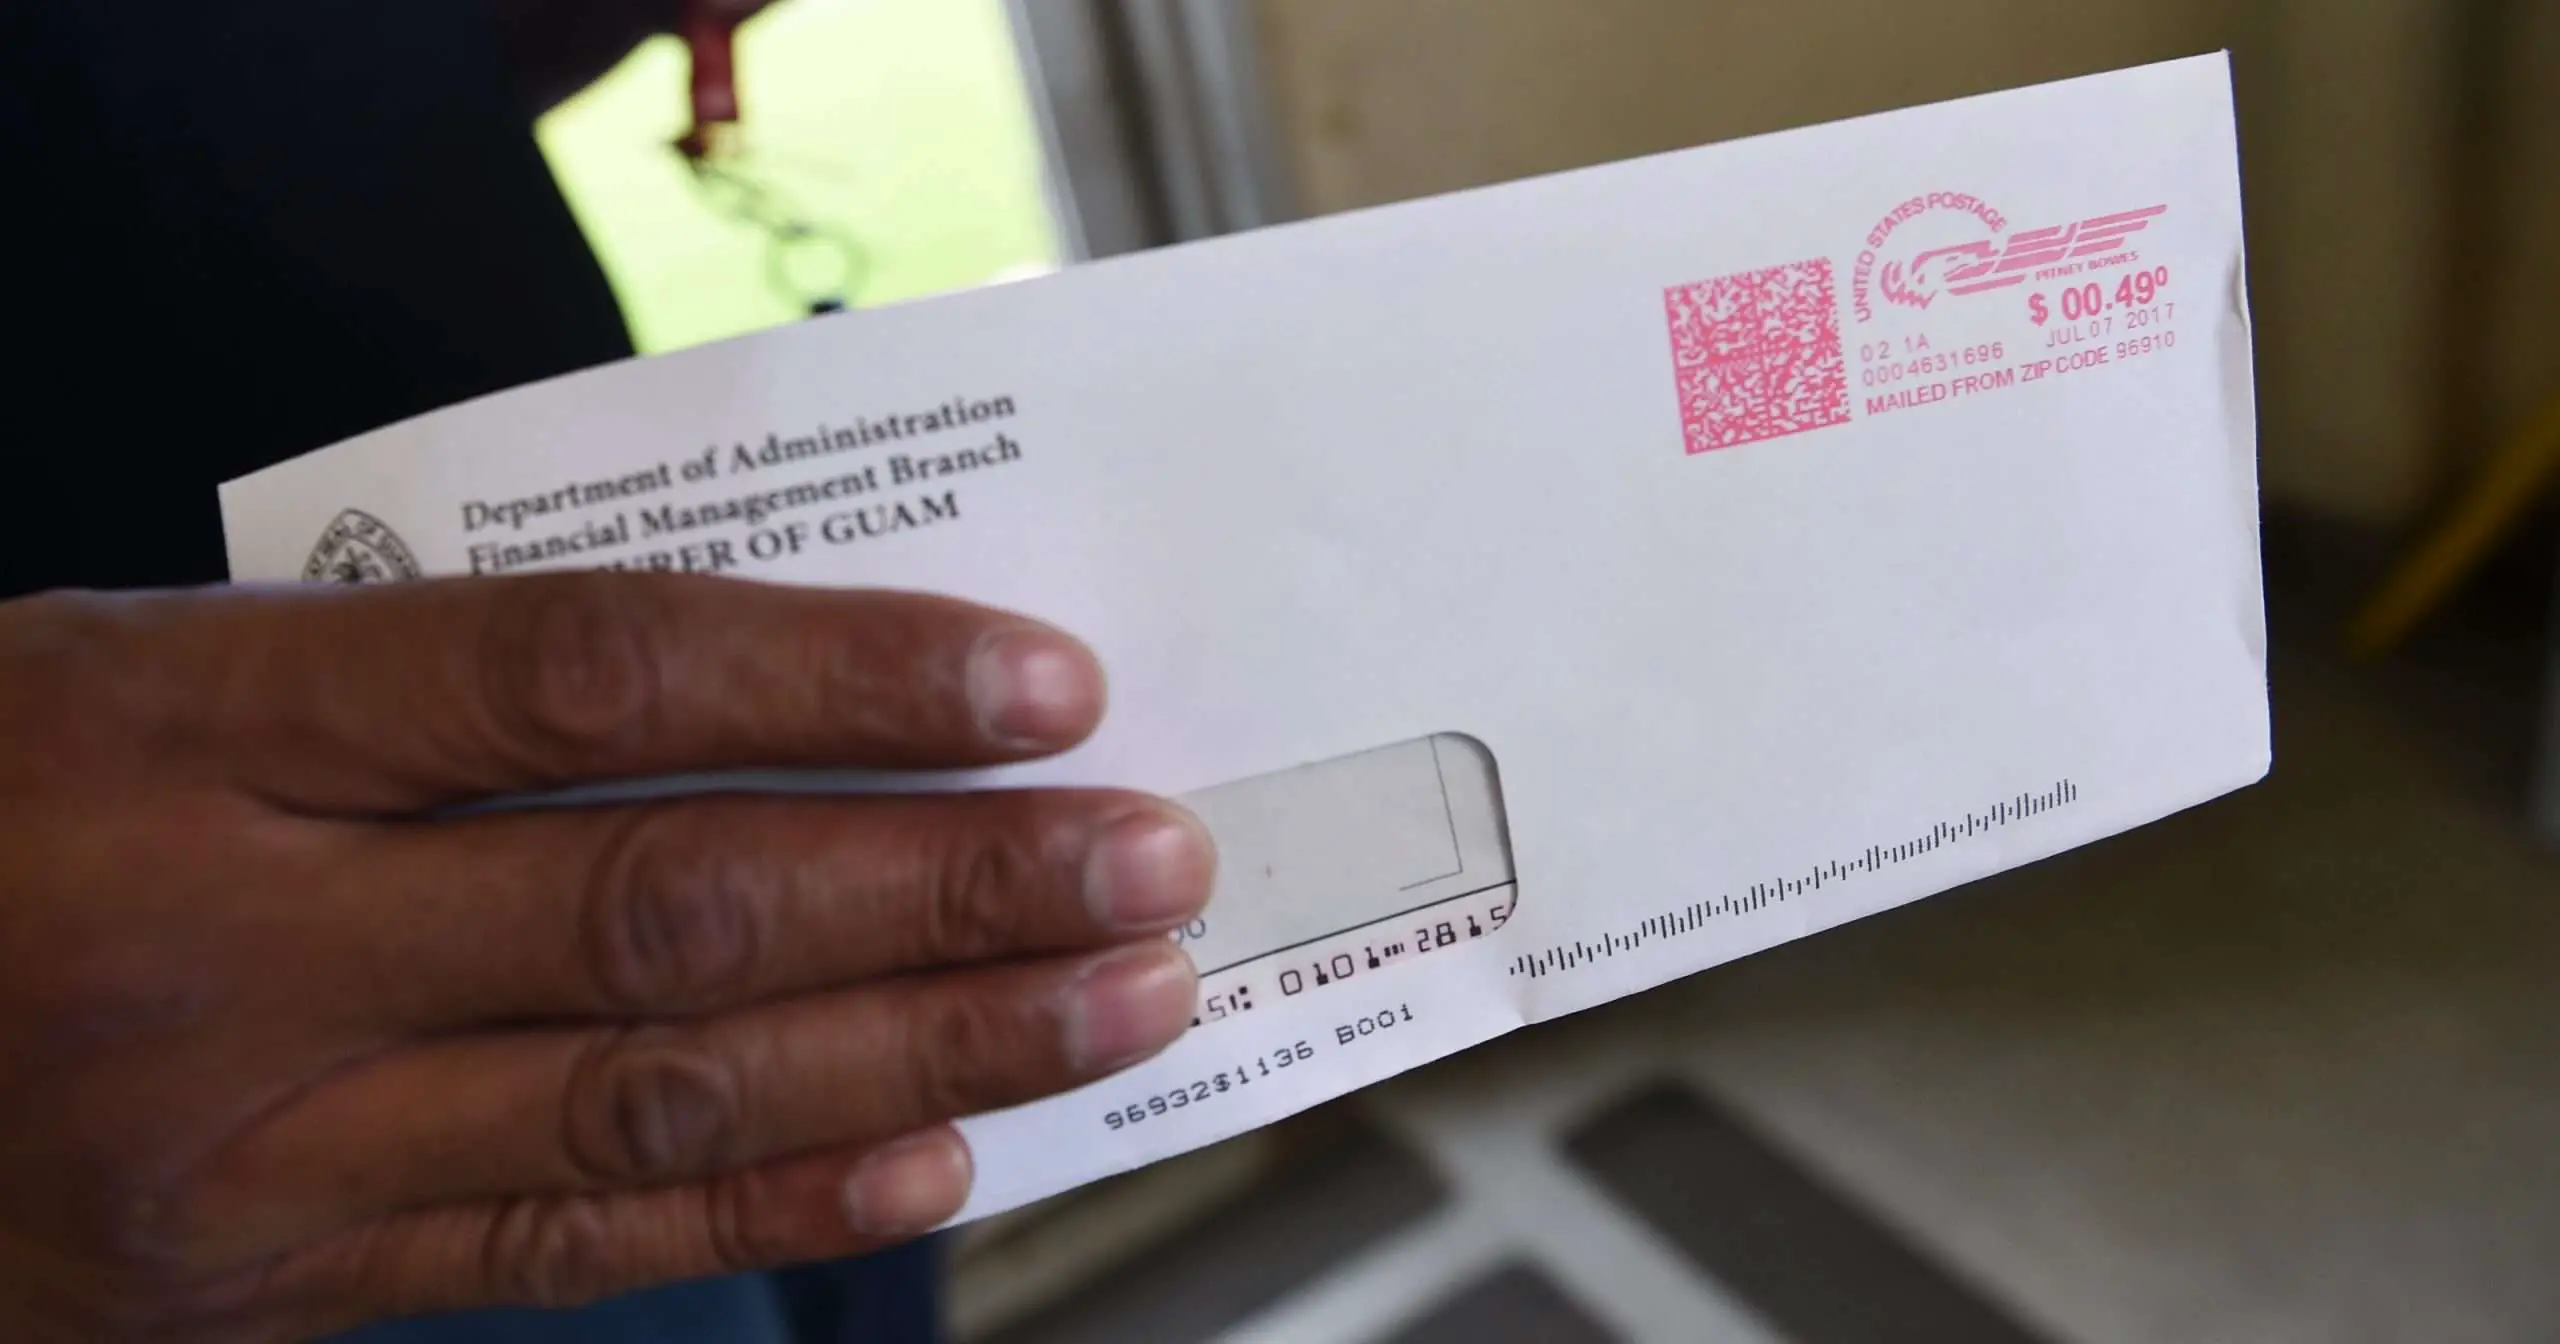 Tax refund checks mailed out Monday, including first 2018 returns